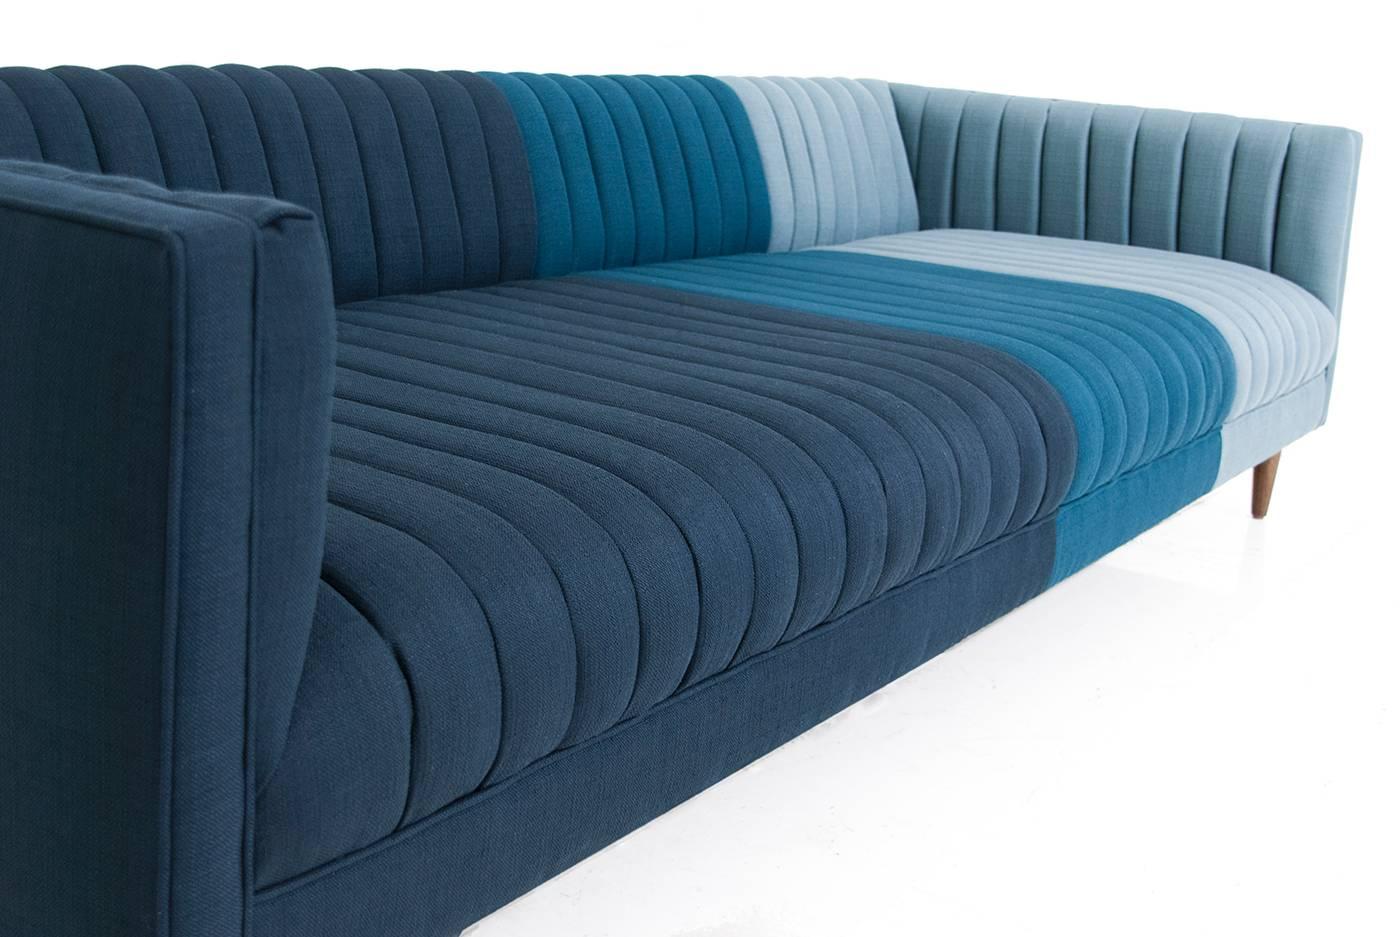 The Manhattan is Modshop's Mid-Century inspired sofa, long arm tufted Featuring Klein Midnight, Azure and Sea linens and 7